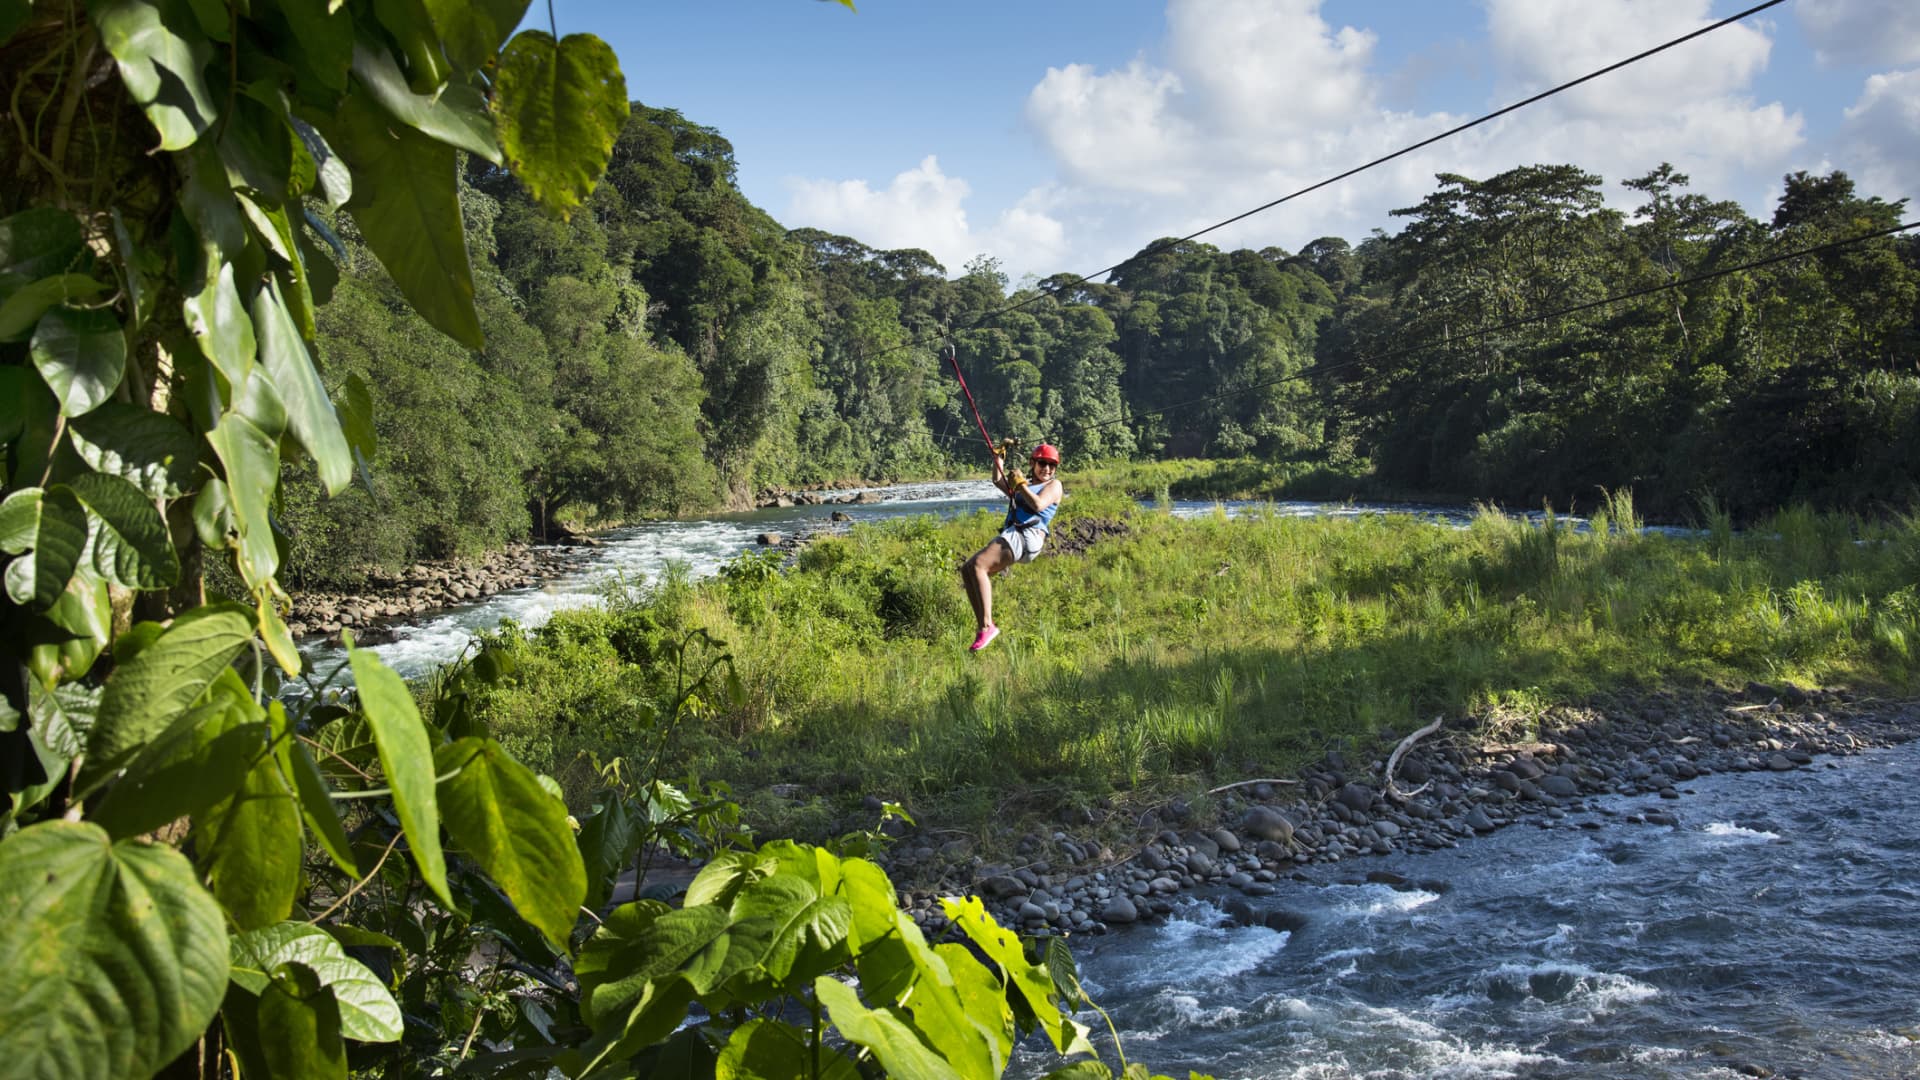 Starting from a high point in the jungle canopy a tourist zips over the Sarapiqui River in Costa Rica.Zip lining has become one of the most popular tourist activities in Costa Rica.